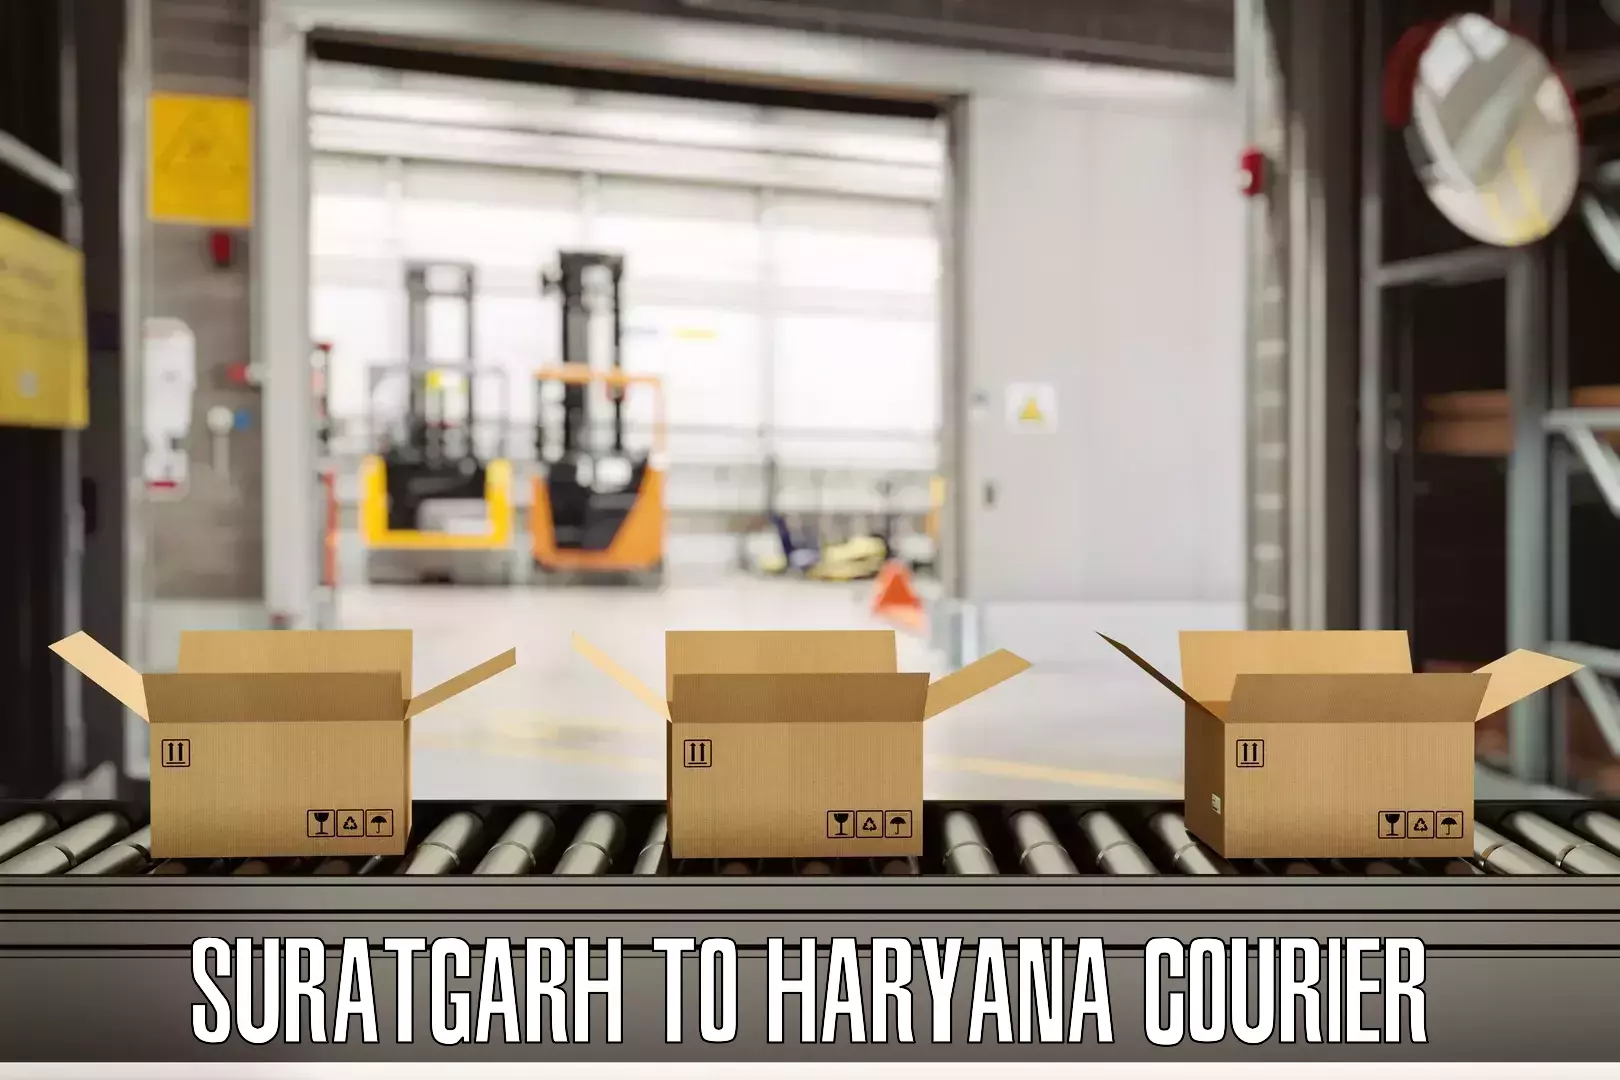 Luggage shipment specialists Suratgarh to NCR Haryana